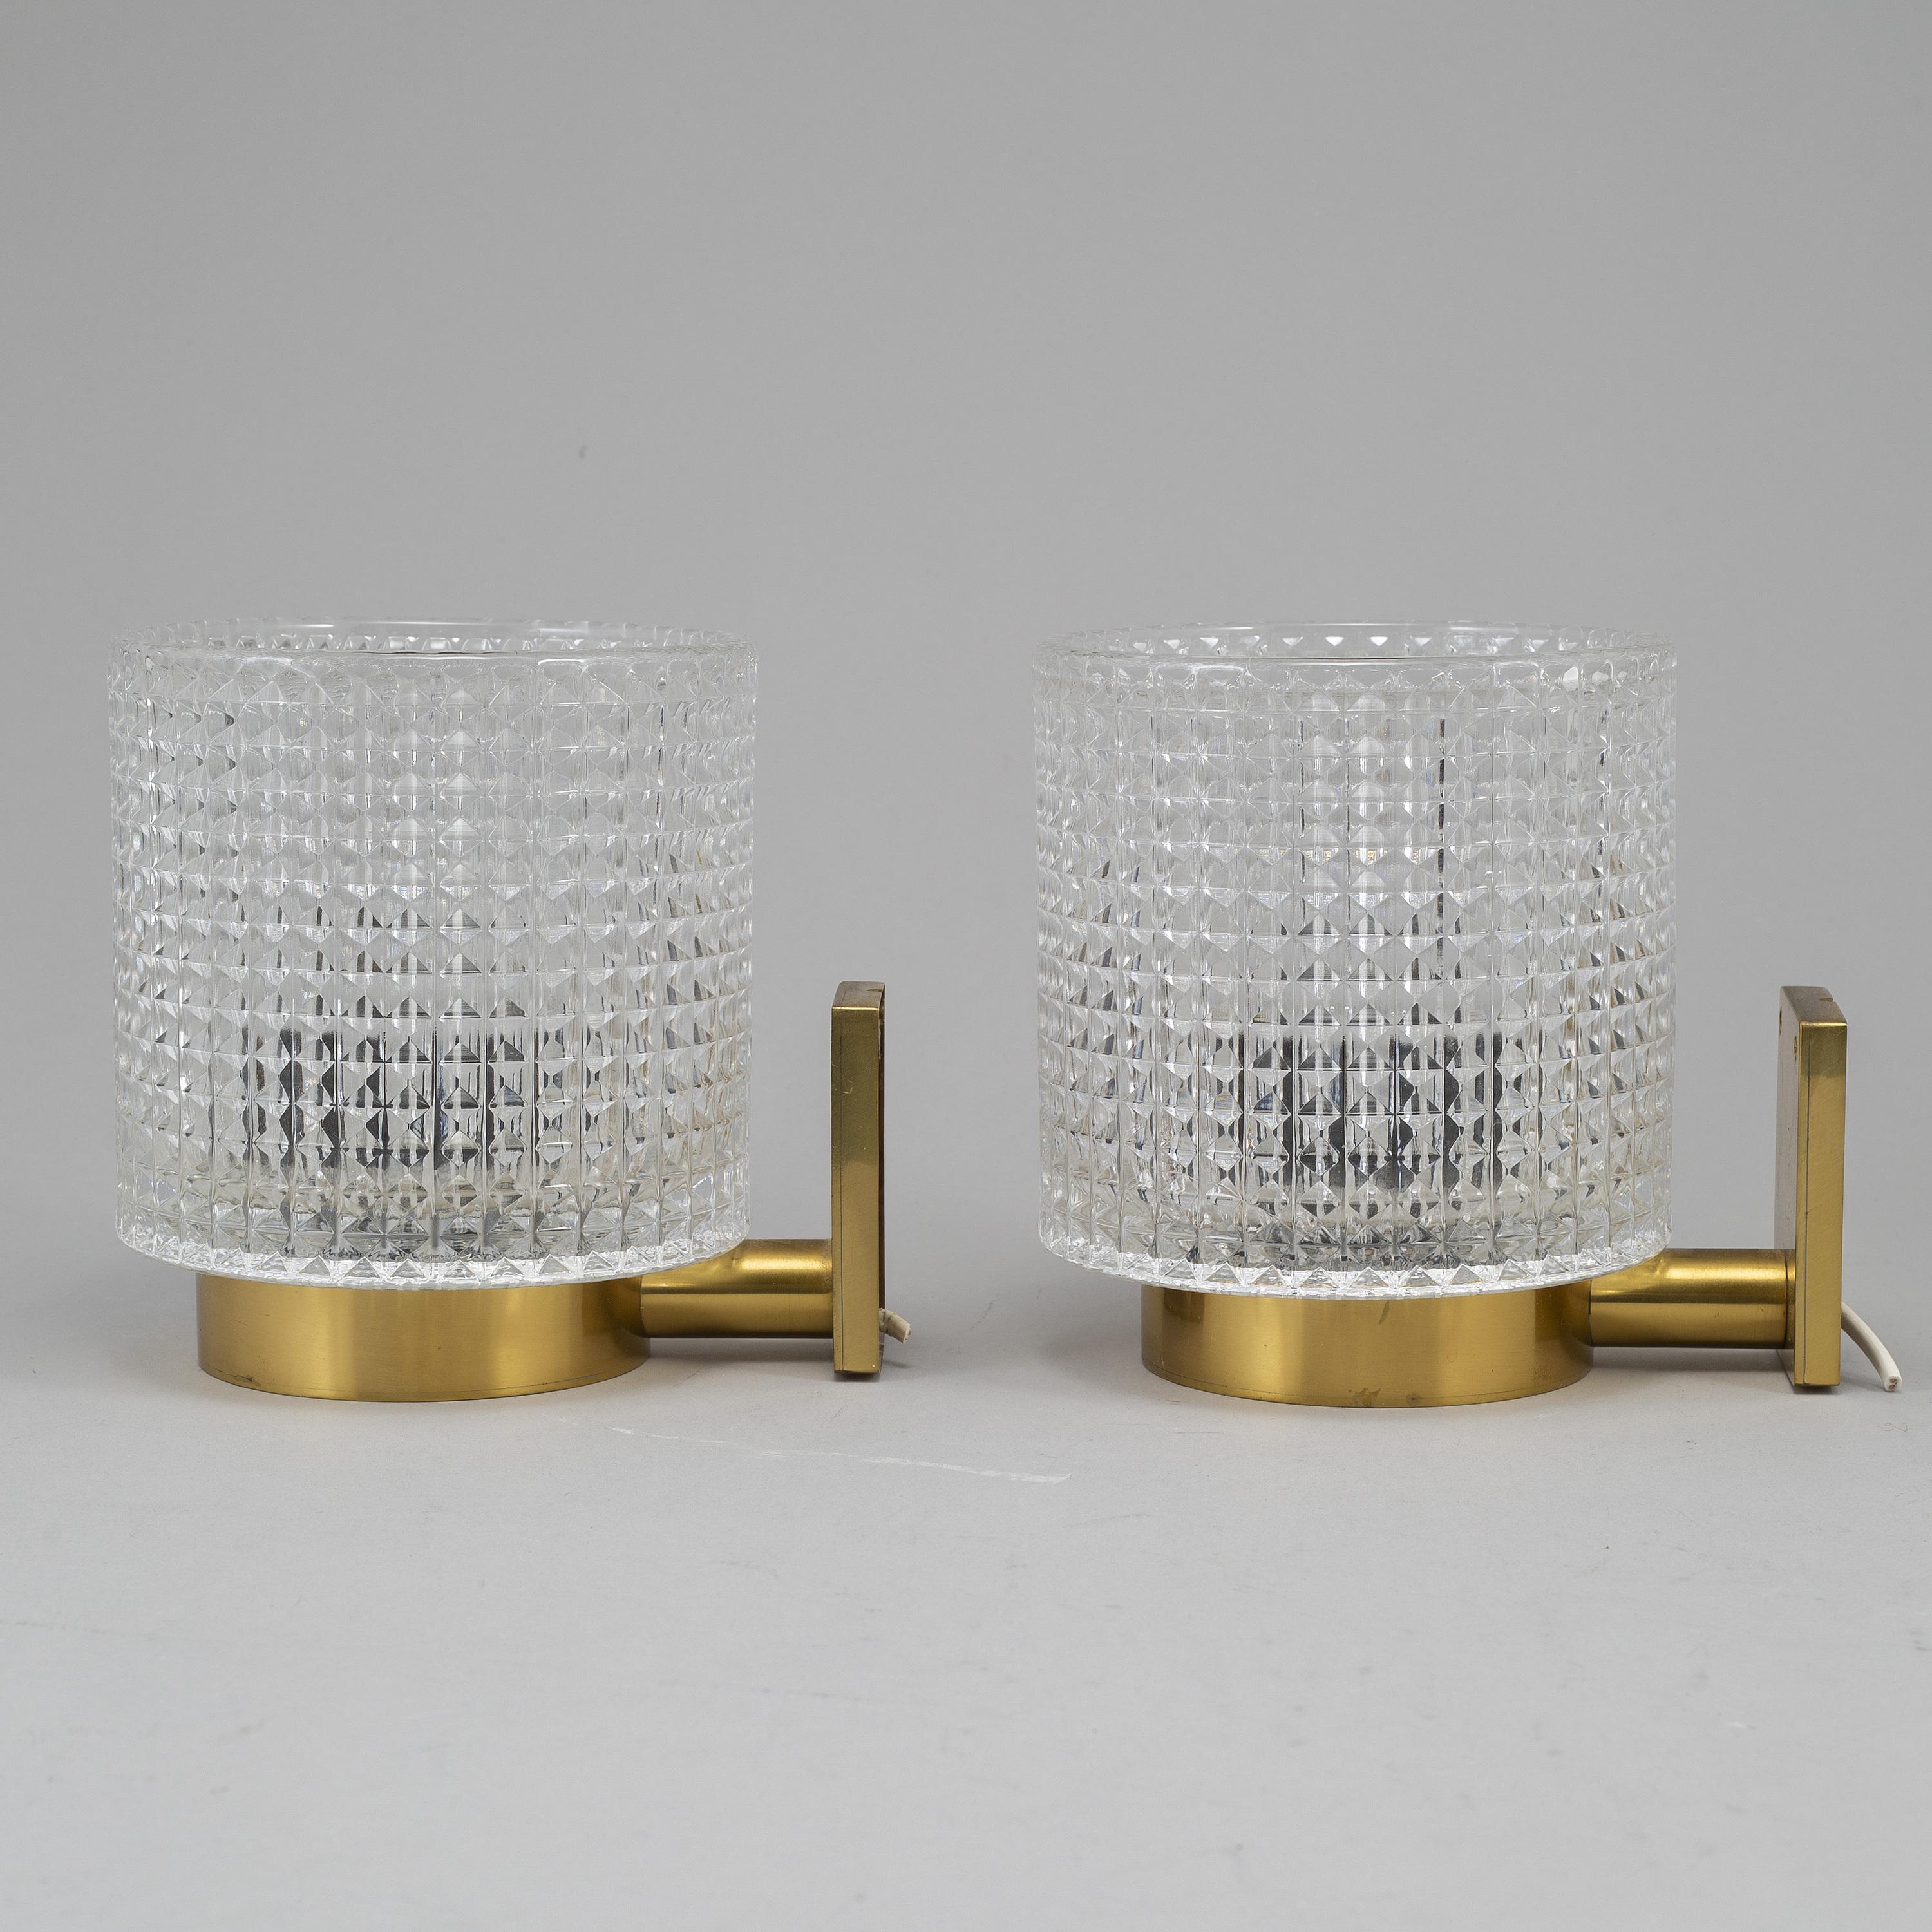 very elegant pair of sconces by carl Fagerlund for Orrefors, brass with diamond cut glass good condition, electrical has not been tested.